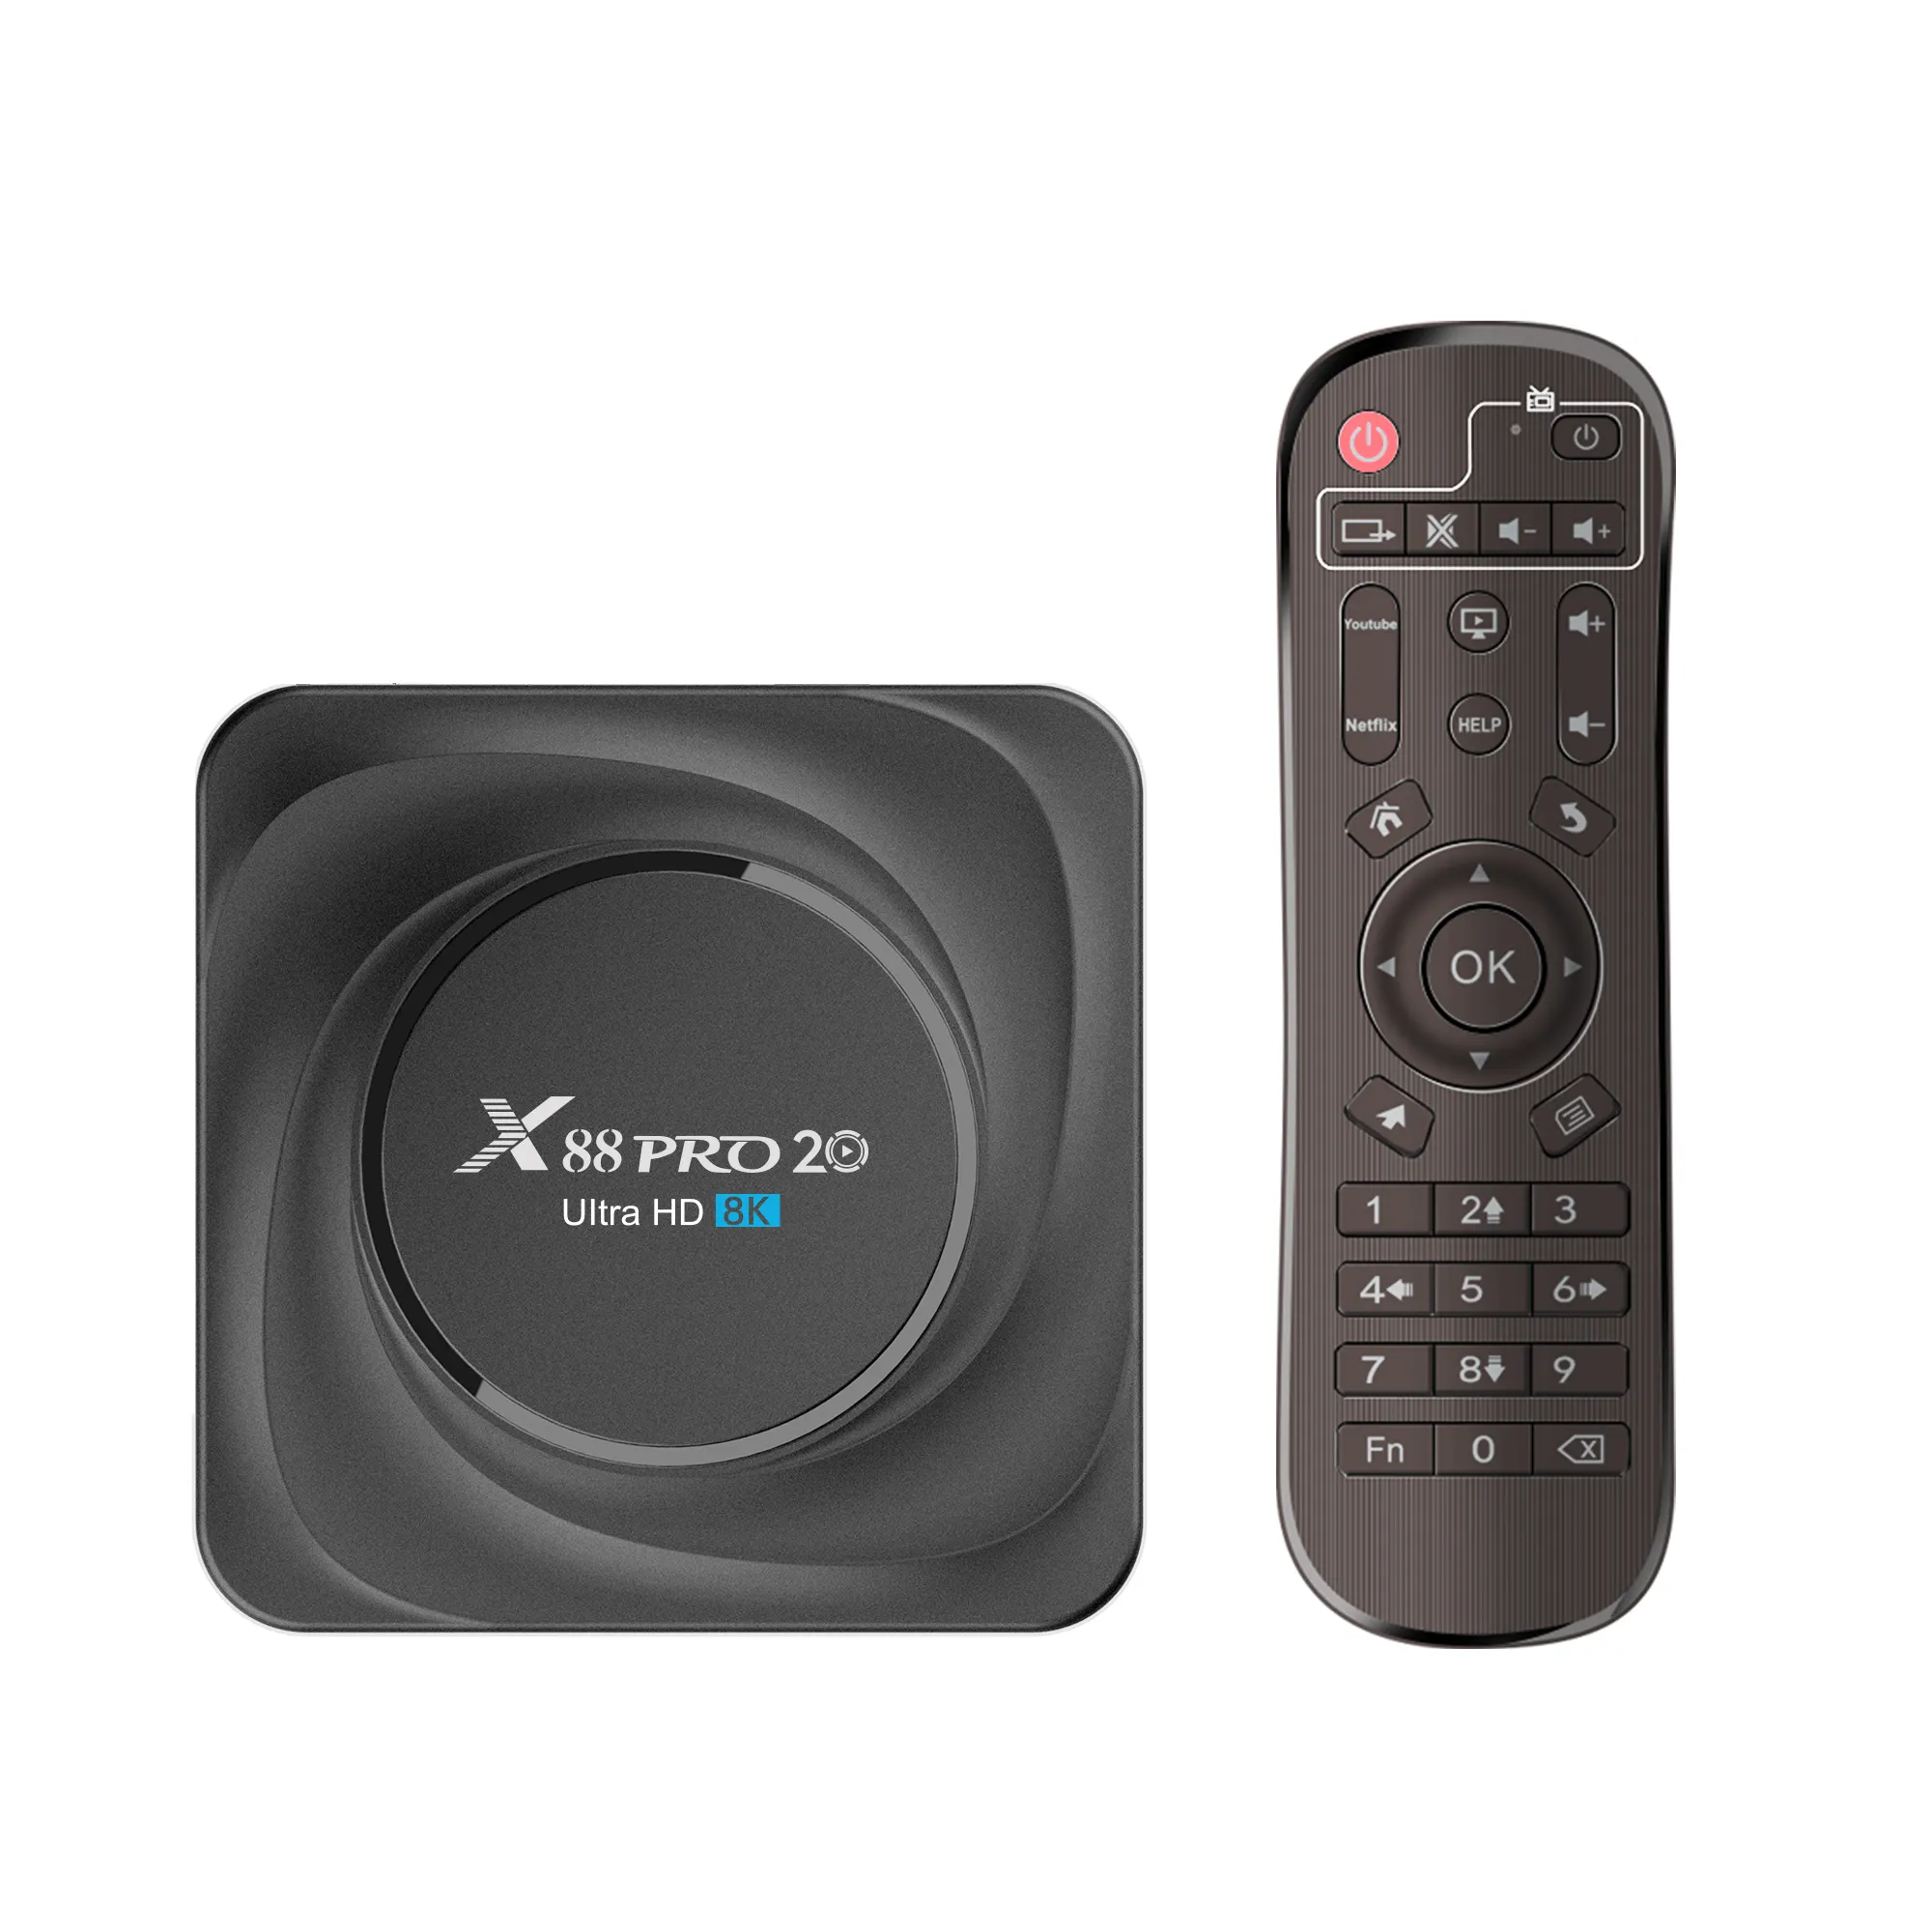 Newest X88 PRO 20 android 11 RK3566 android set top box